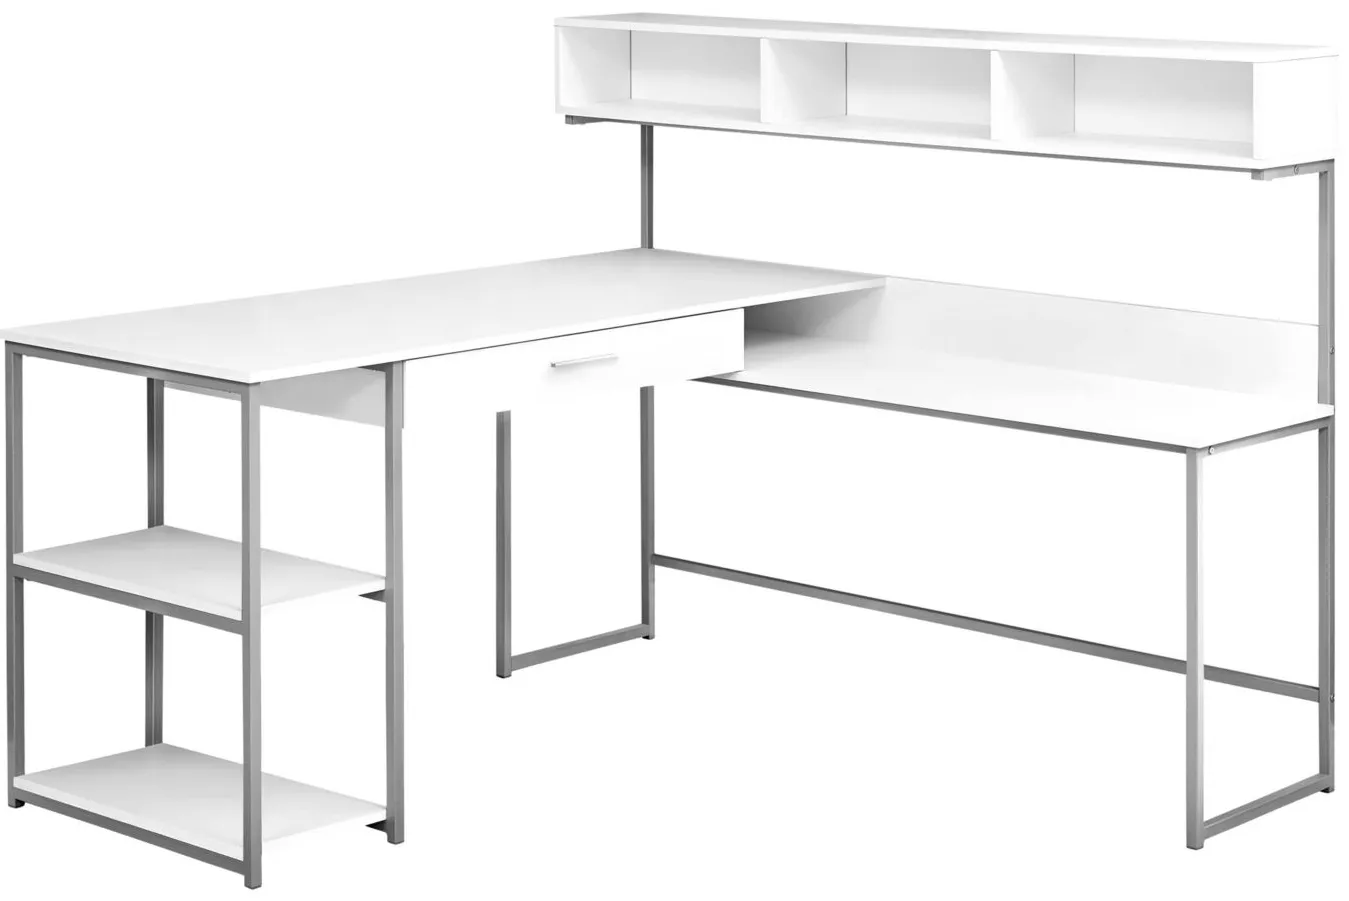 Charlie Computer Desk in WHITE SILVER METAL by Monarch Specialties